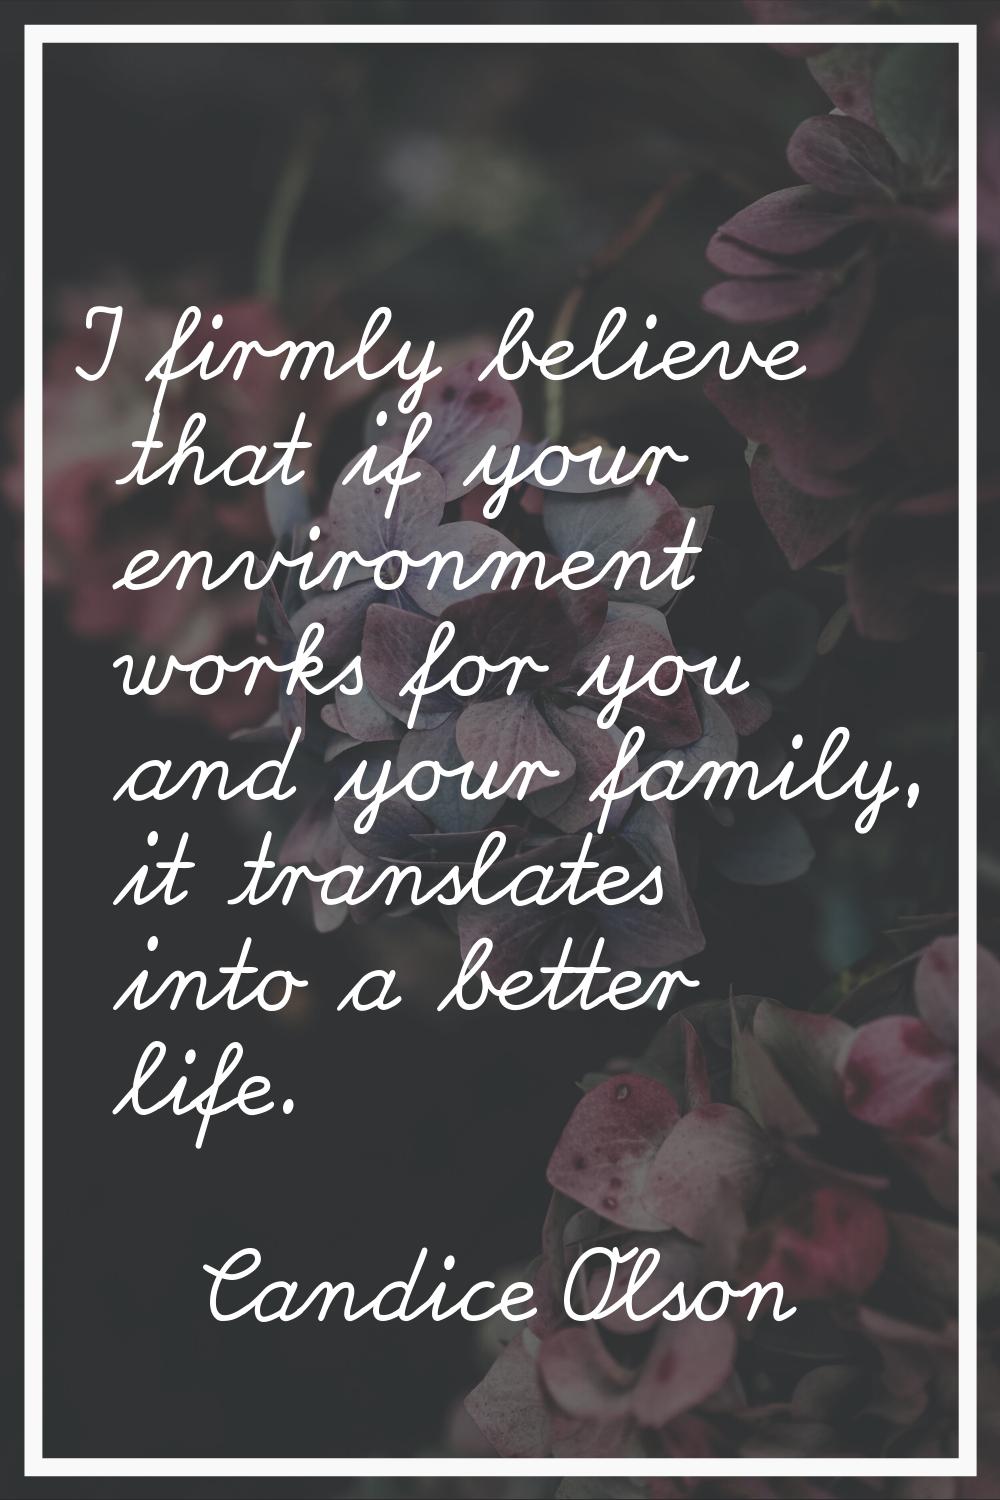 I firmly believe that if your environment works for you and your family, it translates into a bette